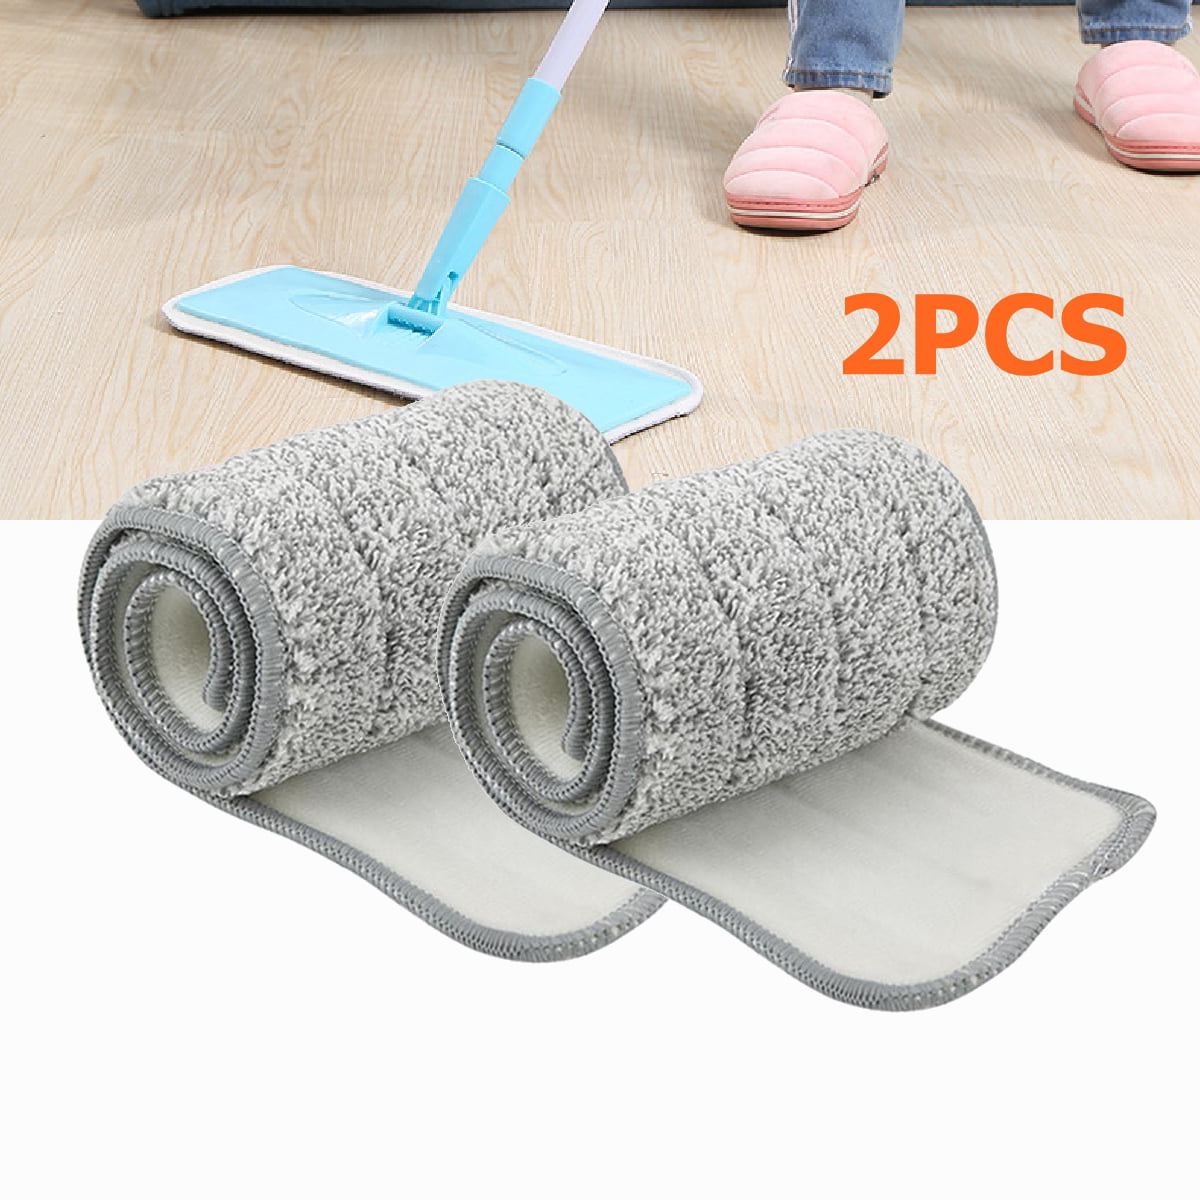 Replacement Floor Mop Pads Reusable Water Absorbent Cleaning Cloth Tools Parts 